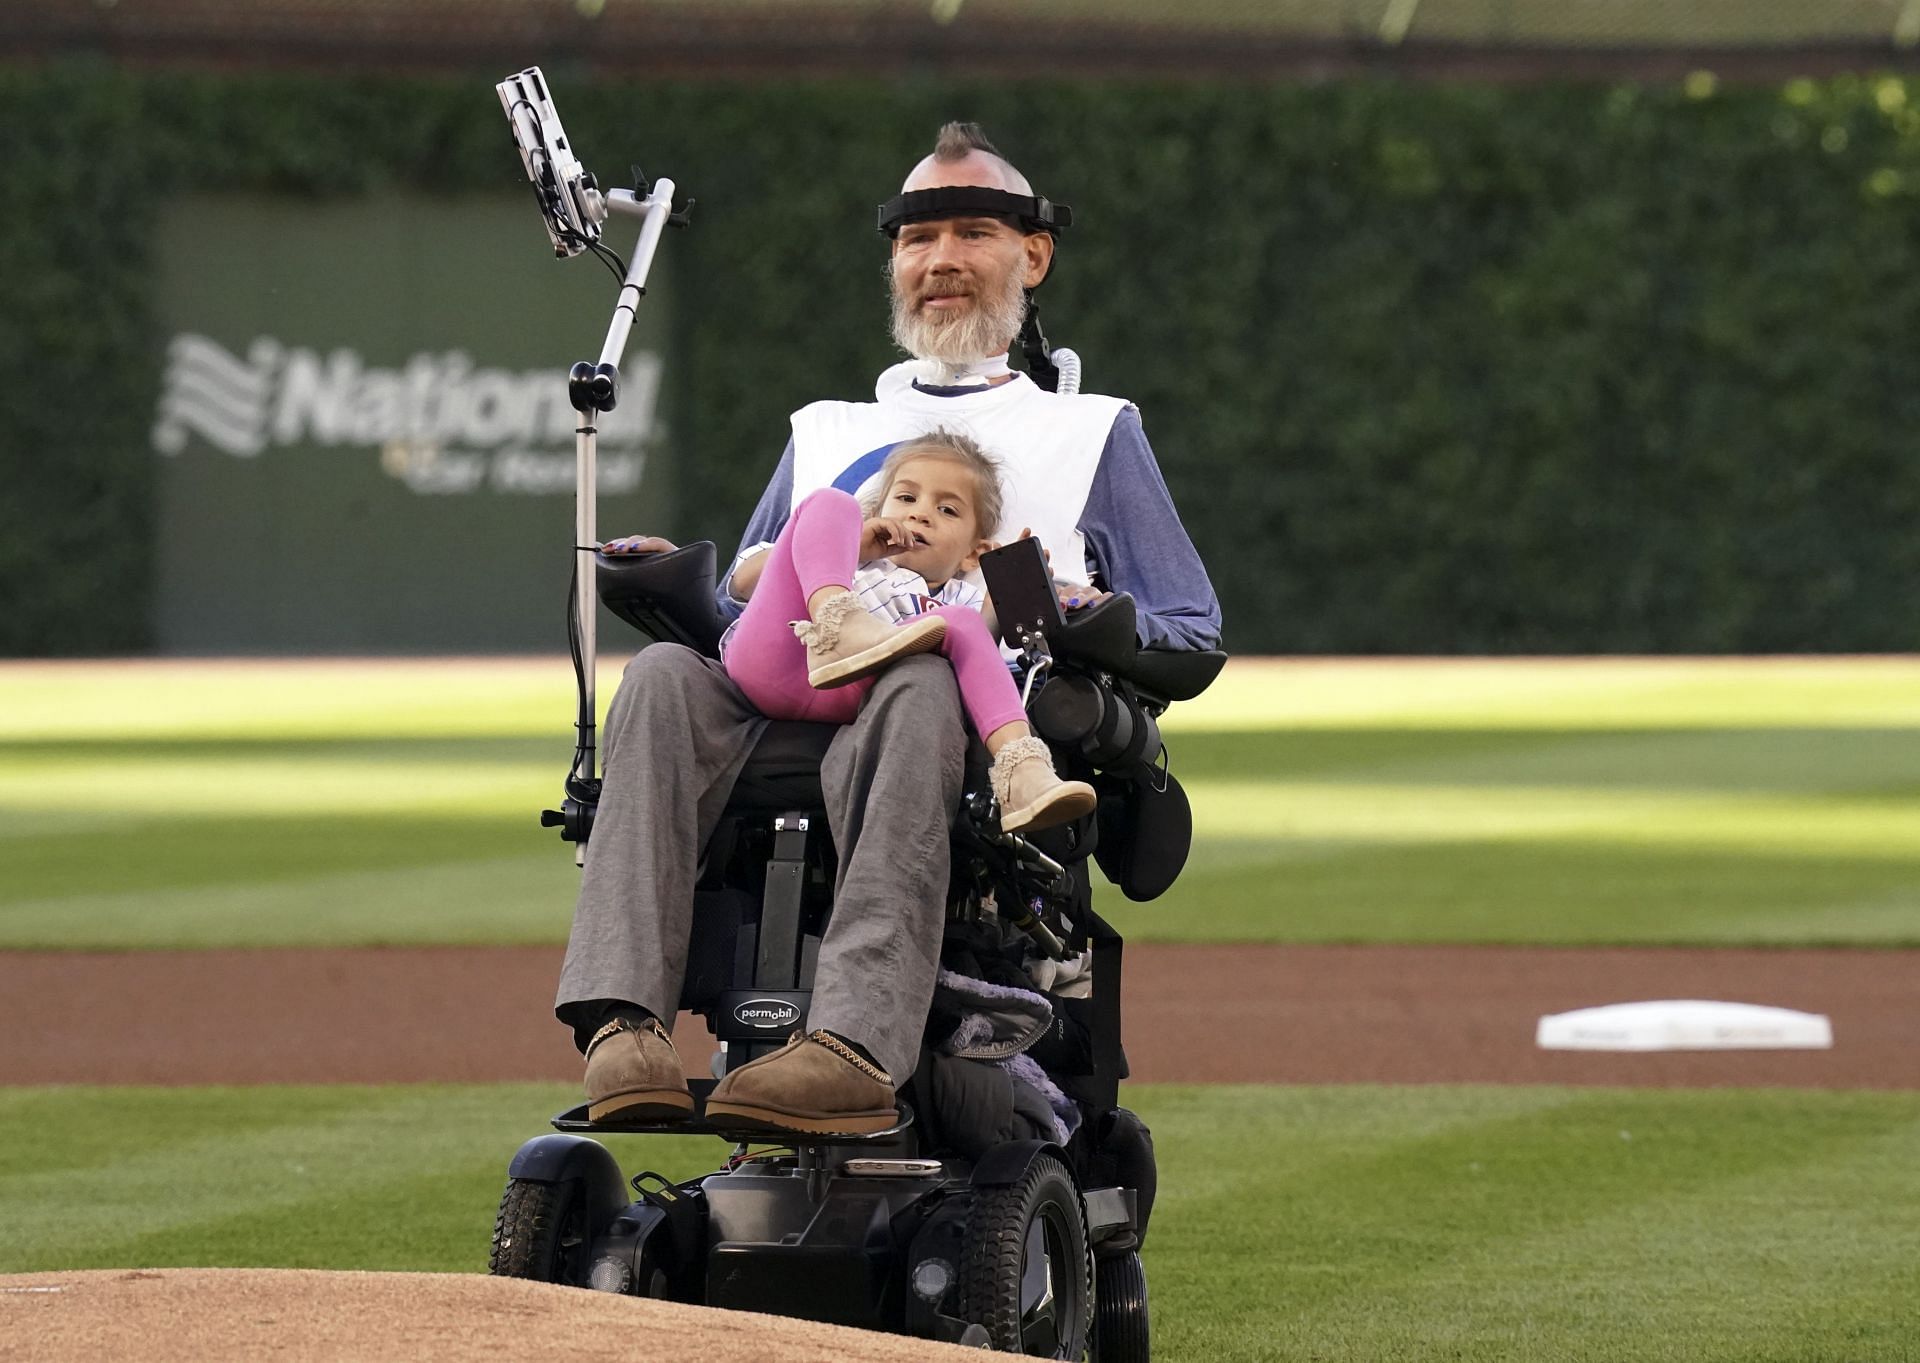 Steve Gleason, a sufferer of Amyotrophic Lateral Sclerosis (ALS), holds his daughter Gray